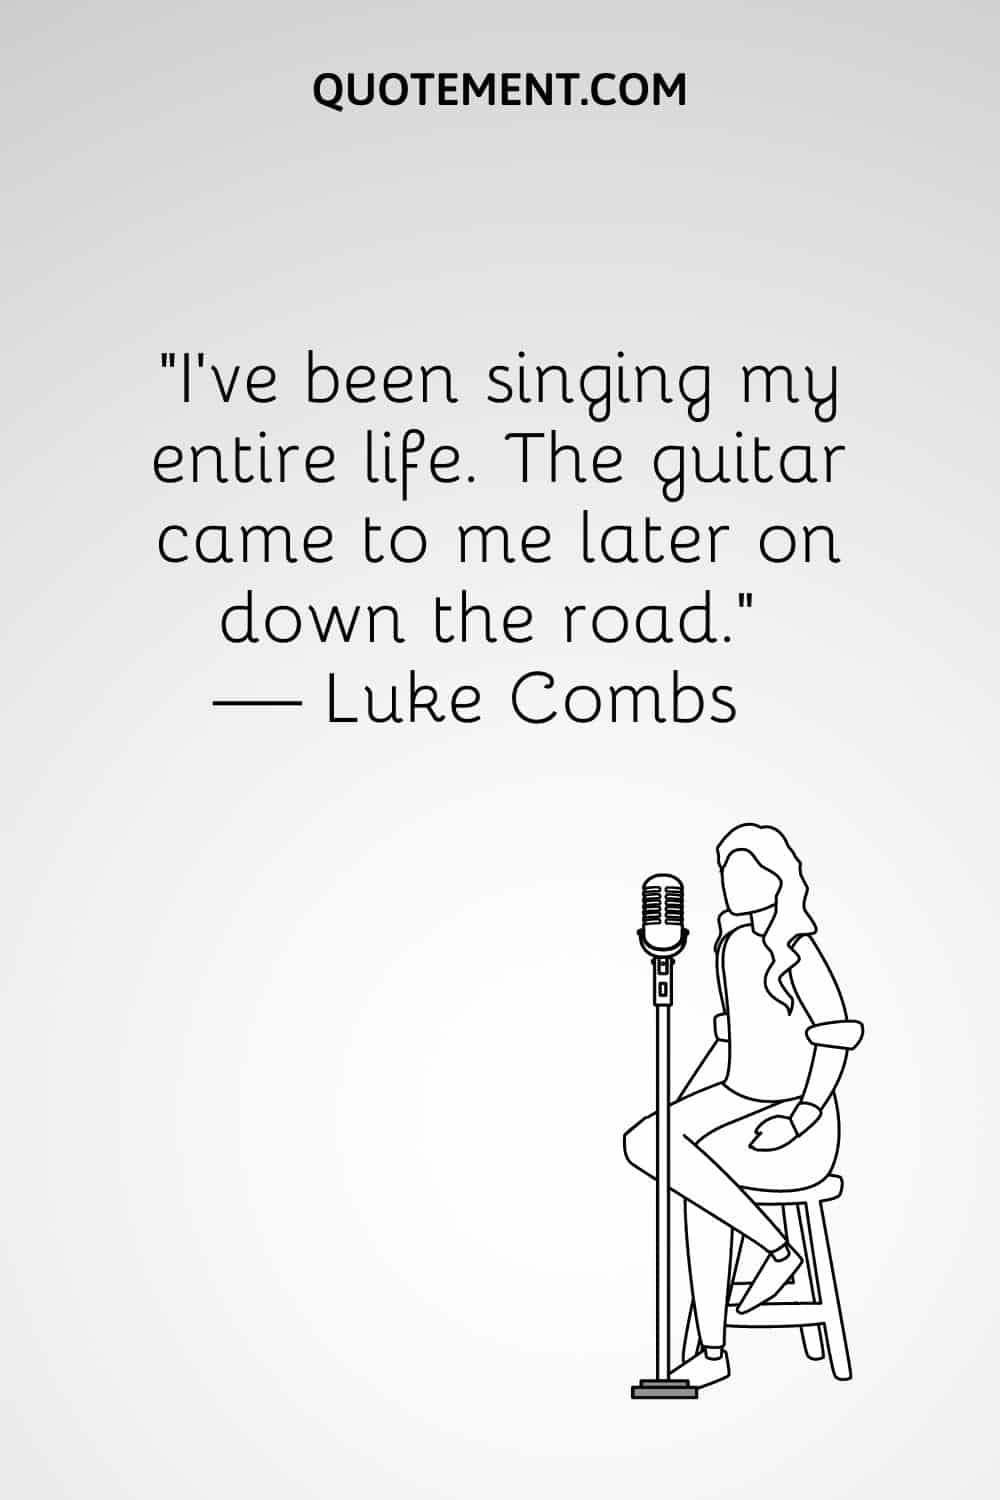 I've been singing my entire life. The guitar came to me later on down the road. — Luke Combs